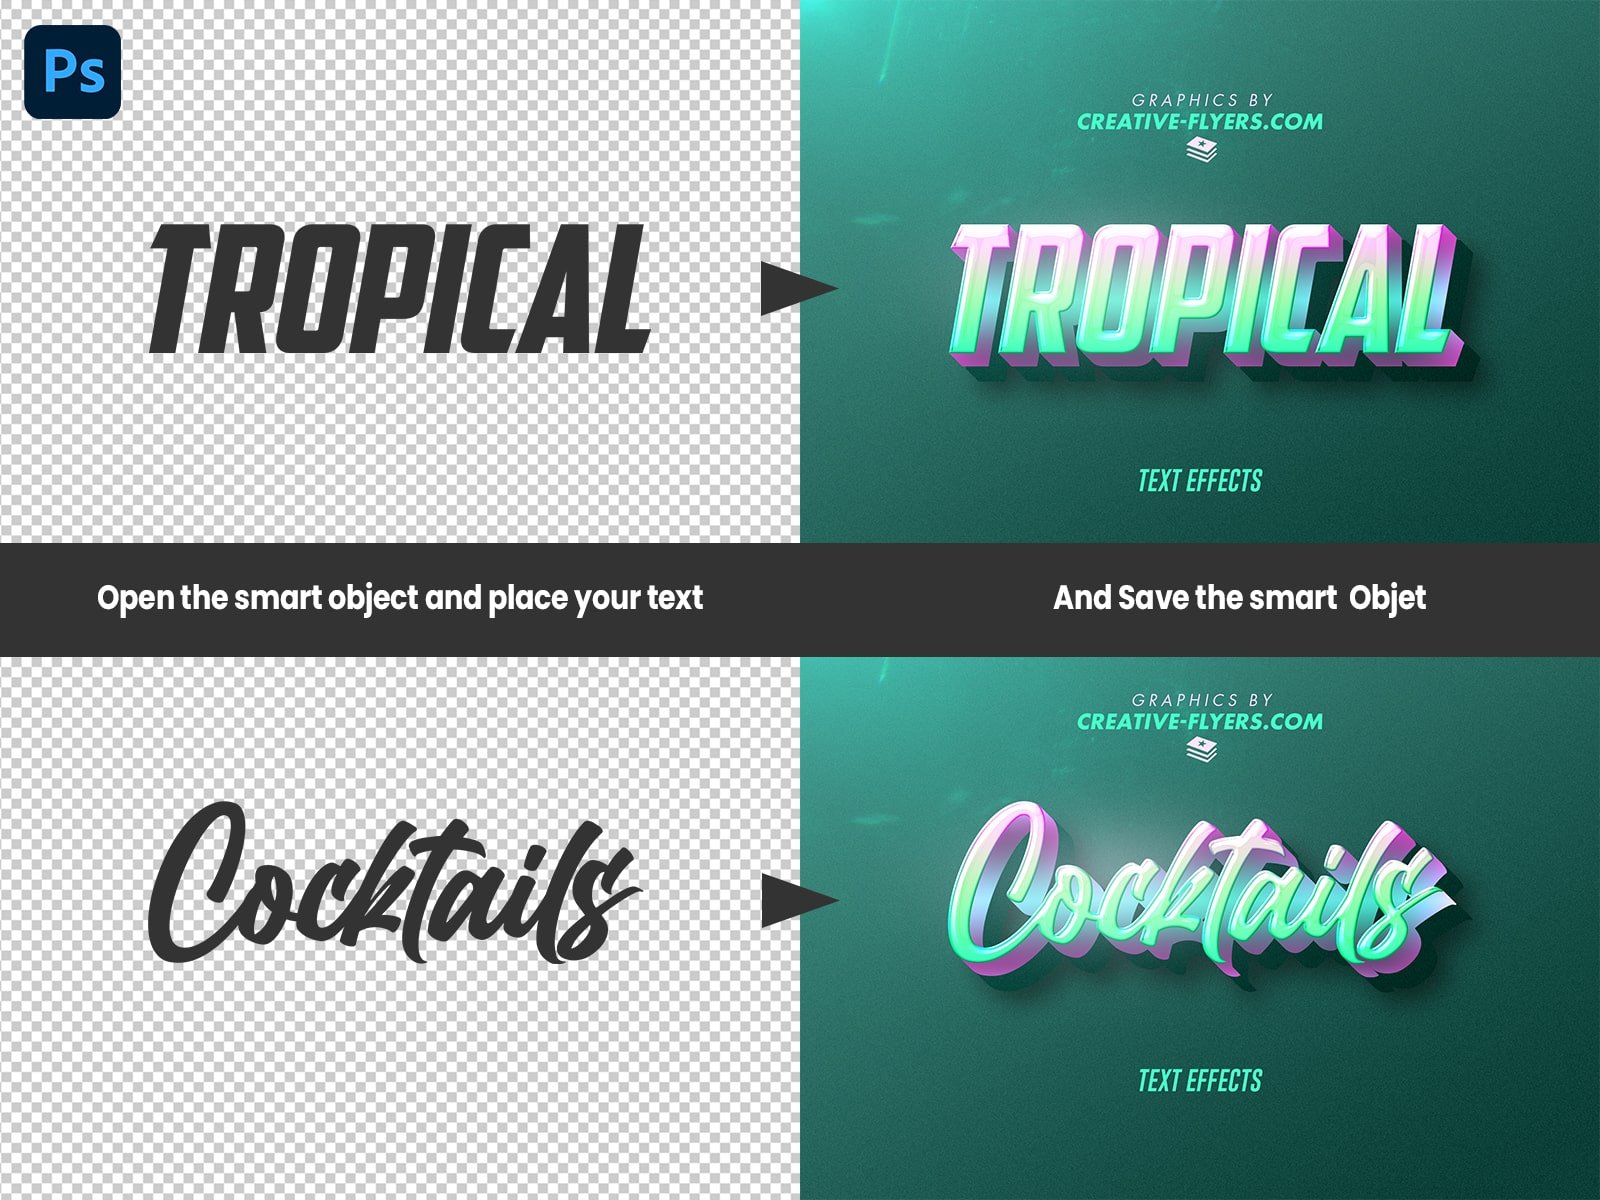 Photoshop Text Effects (Tropical)preview image.